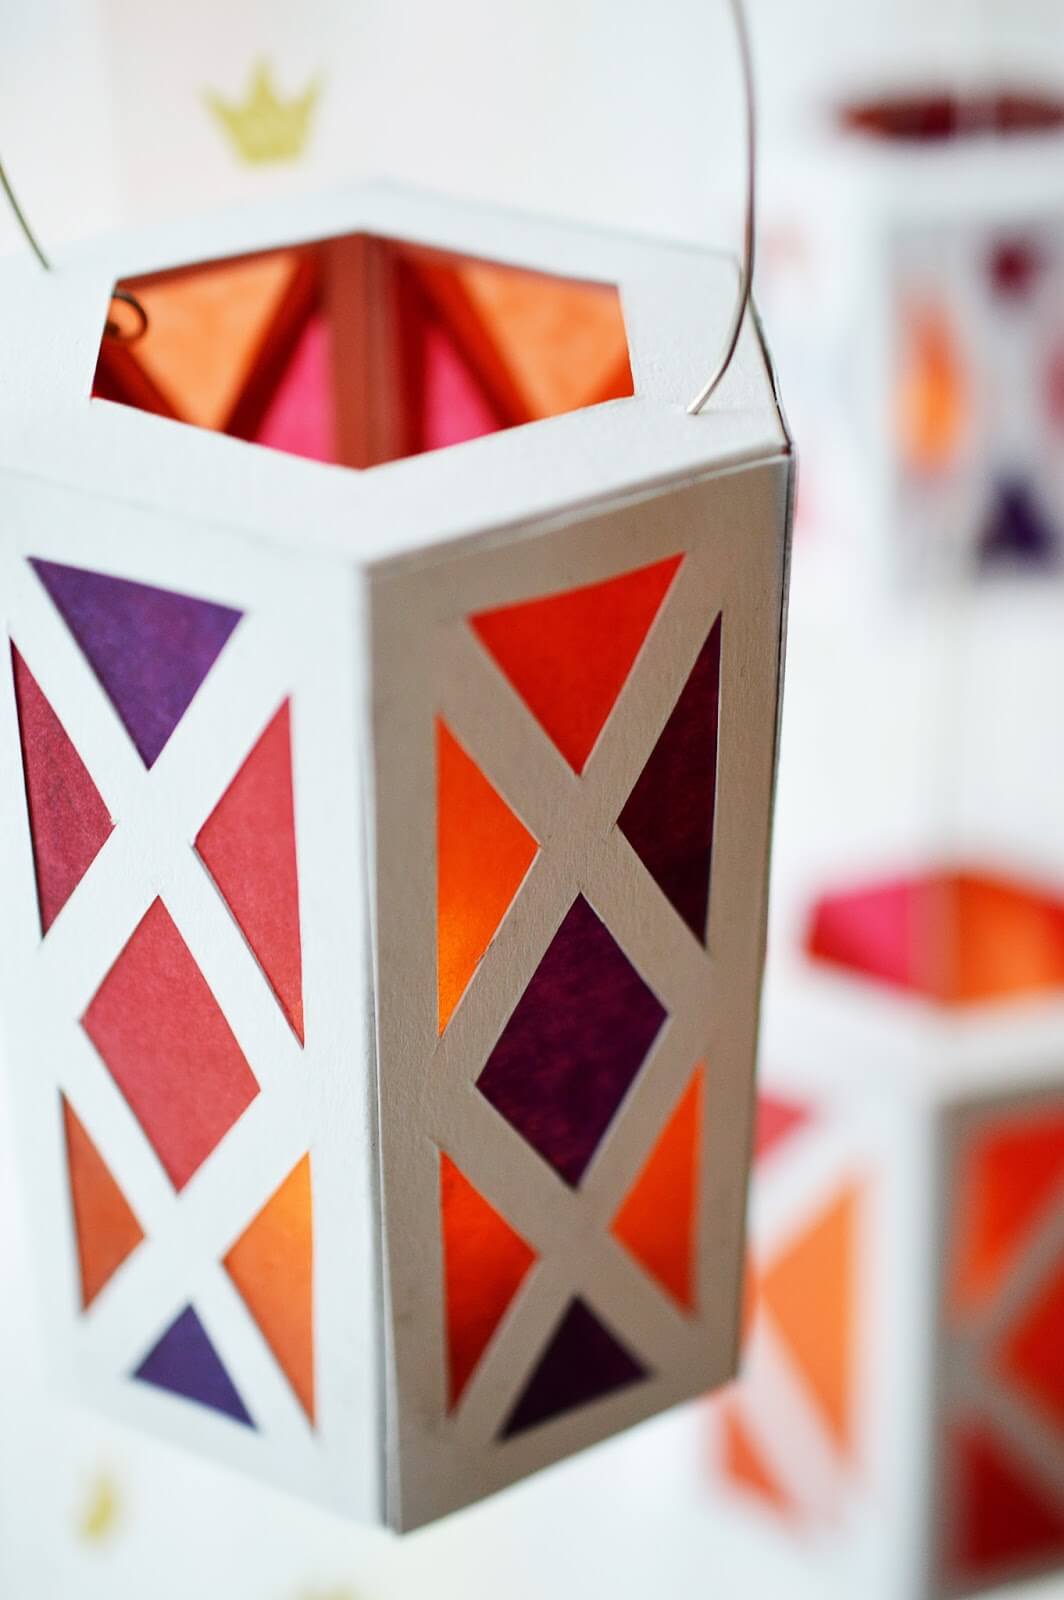 Amazing Paper Lantern Christmas Decoration Craft To Make At Home - Putting Together Paper Lanterns Easily For Diwali & Christmas